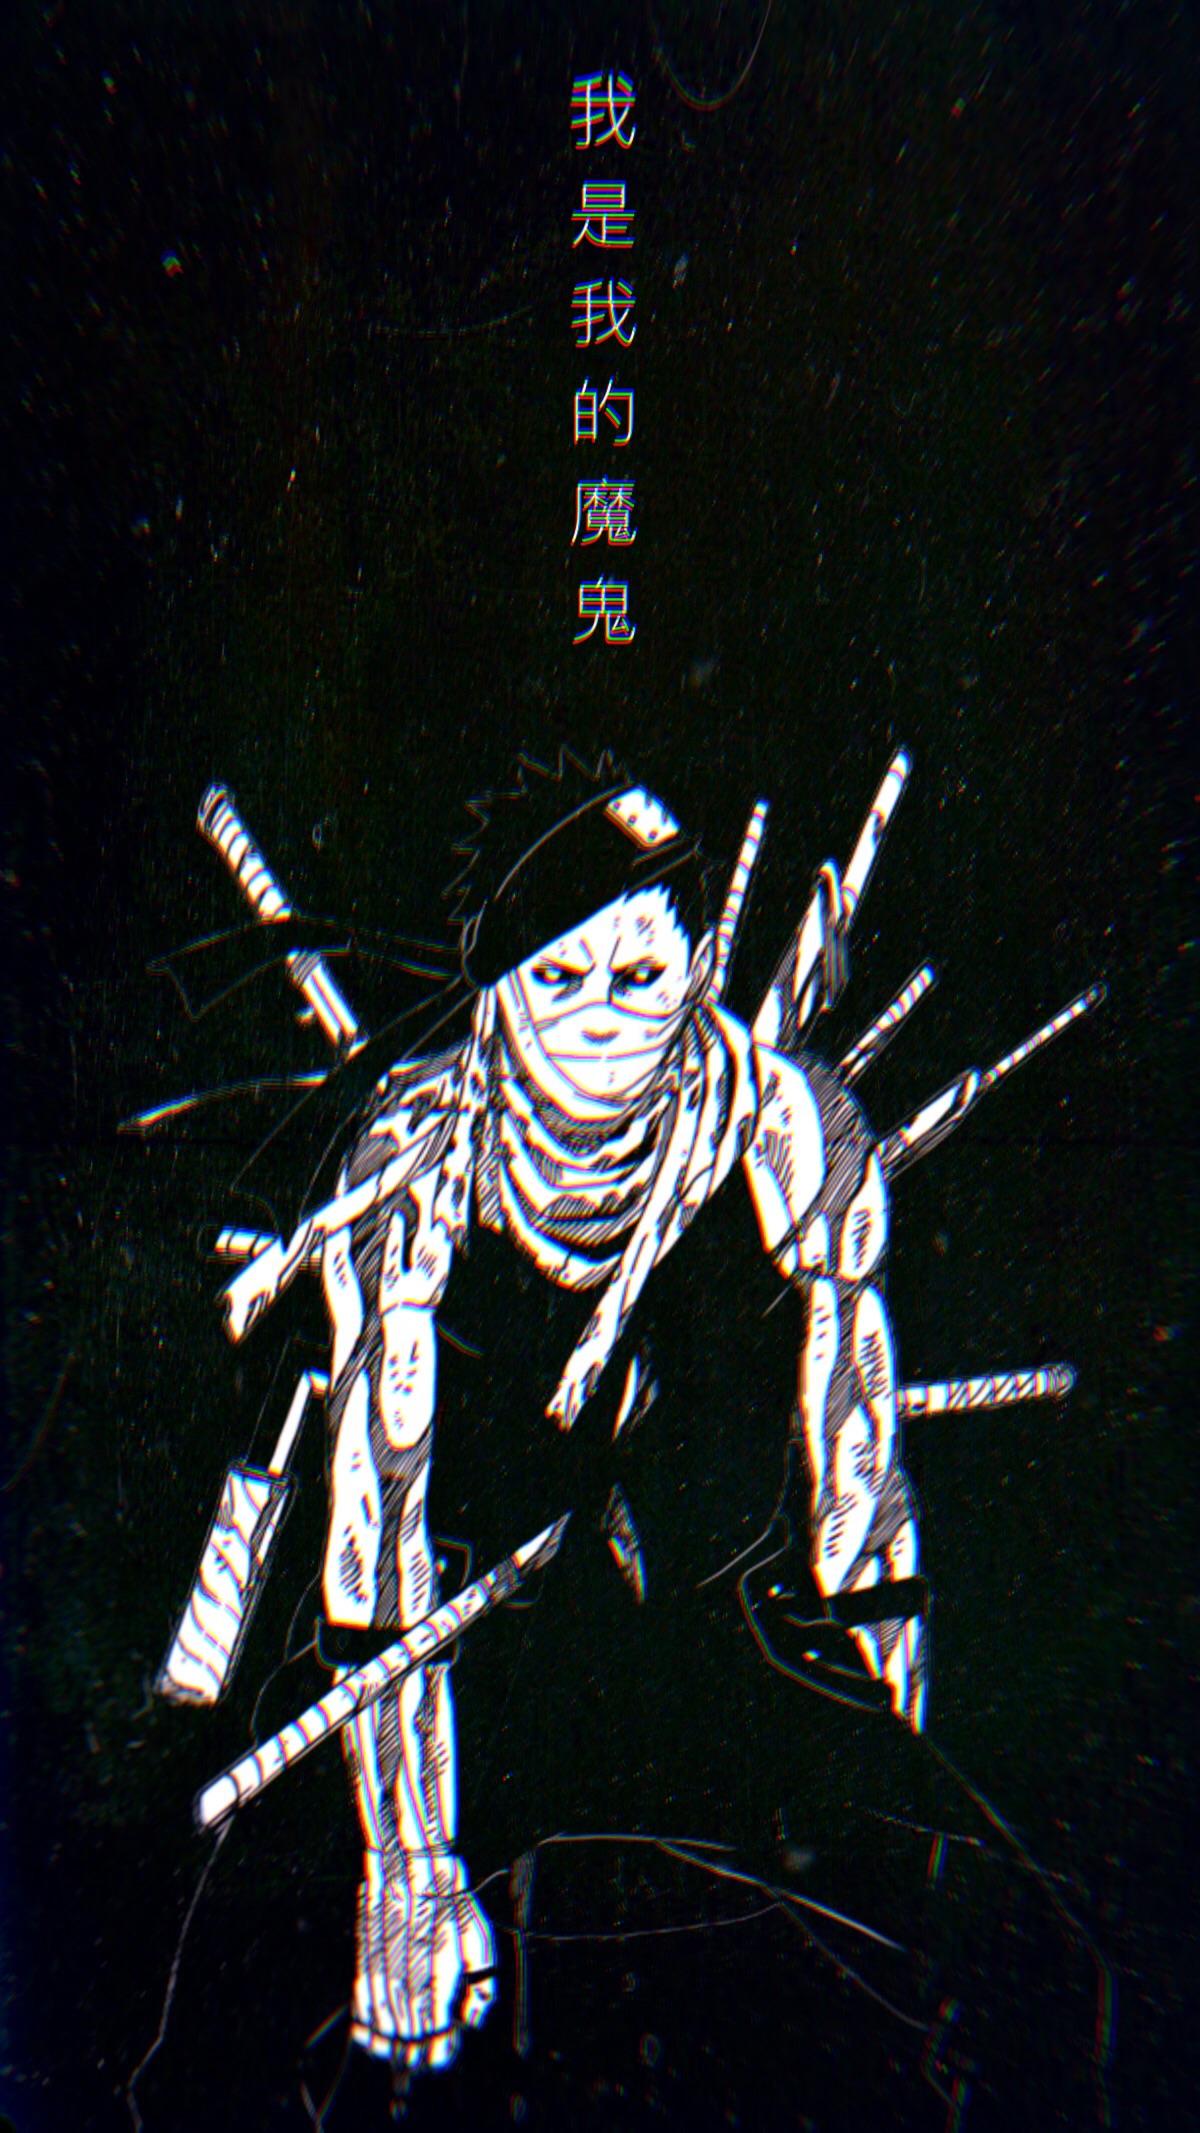 Hi i'm back again with a Zabuza wallpaper, hope you aren't tired of my shit yet :D